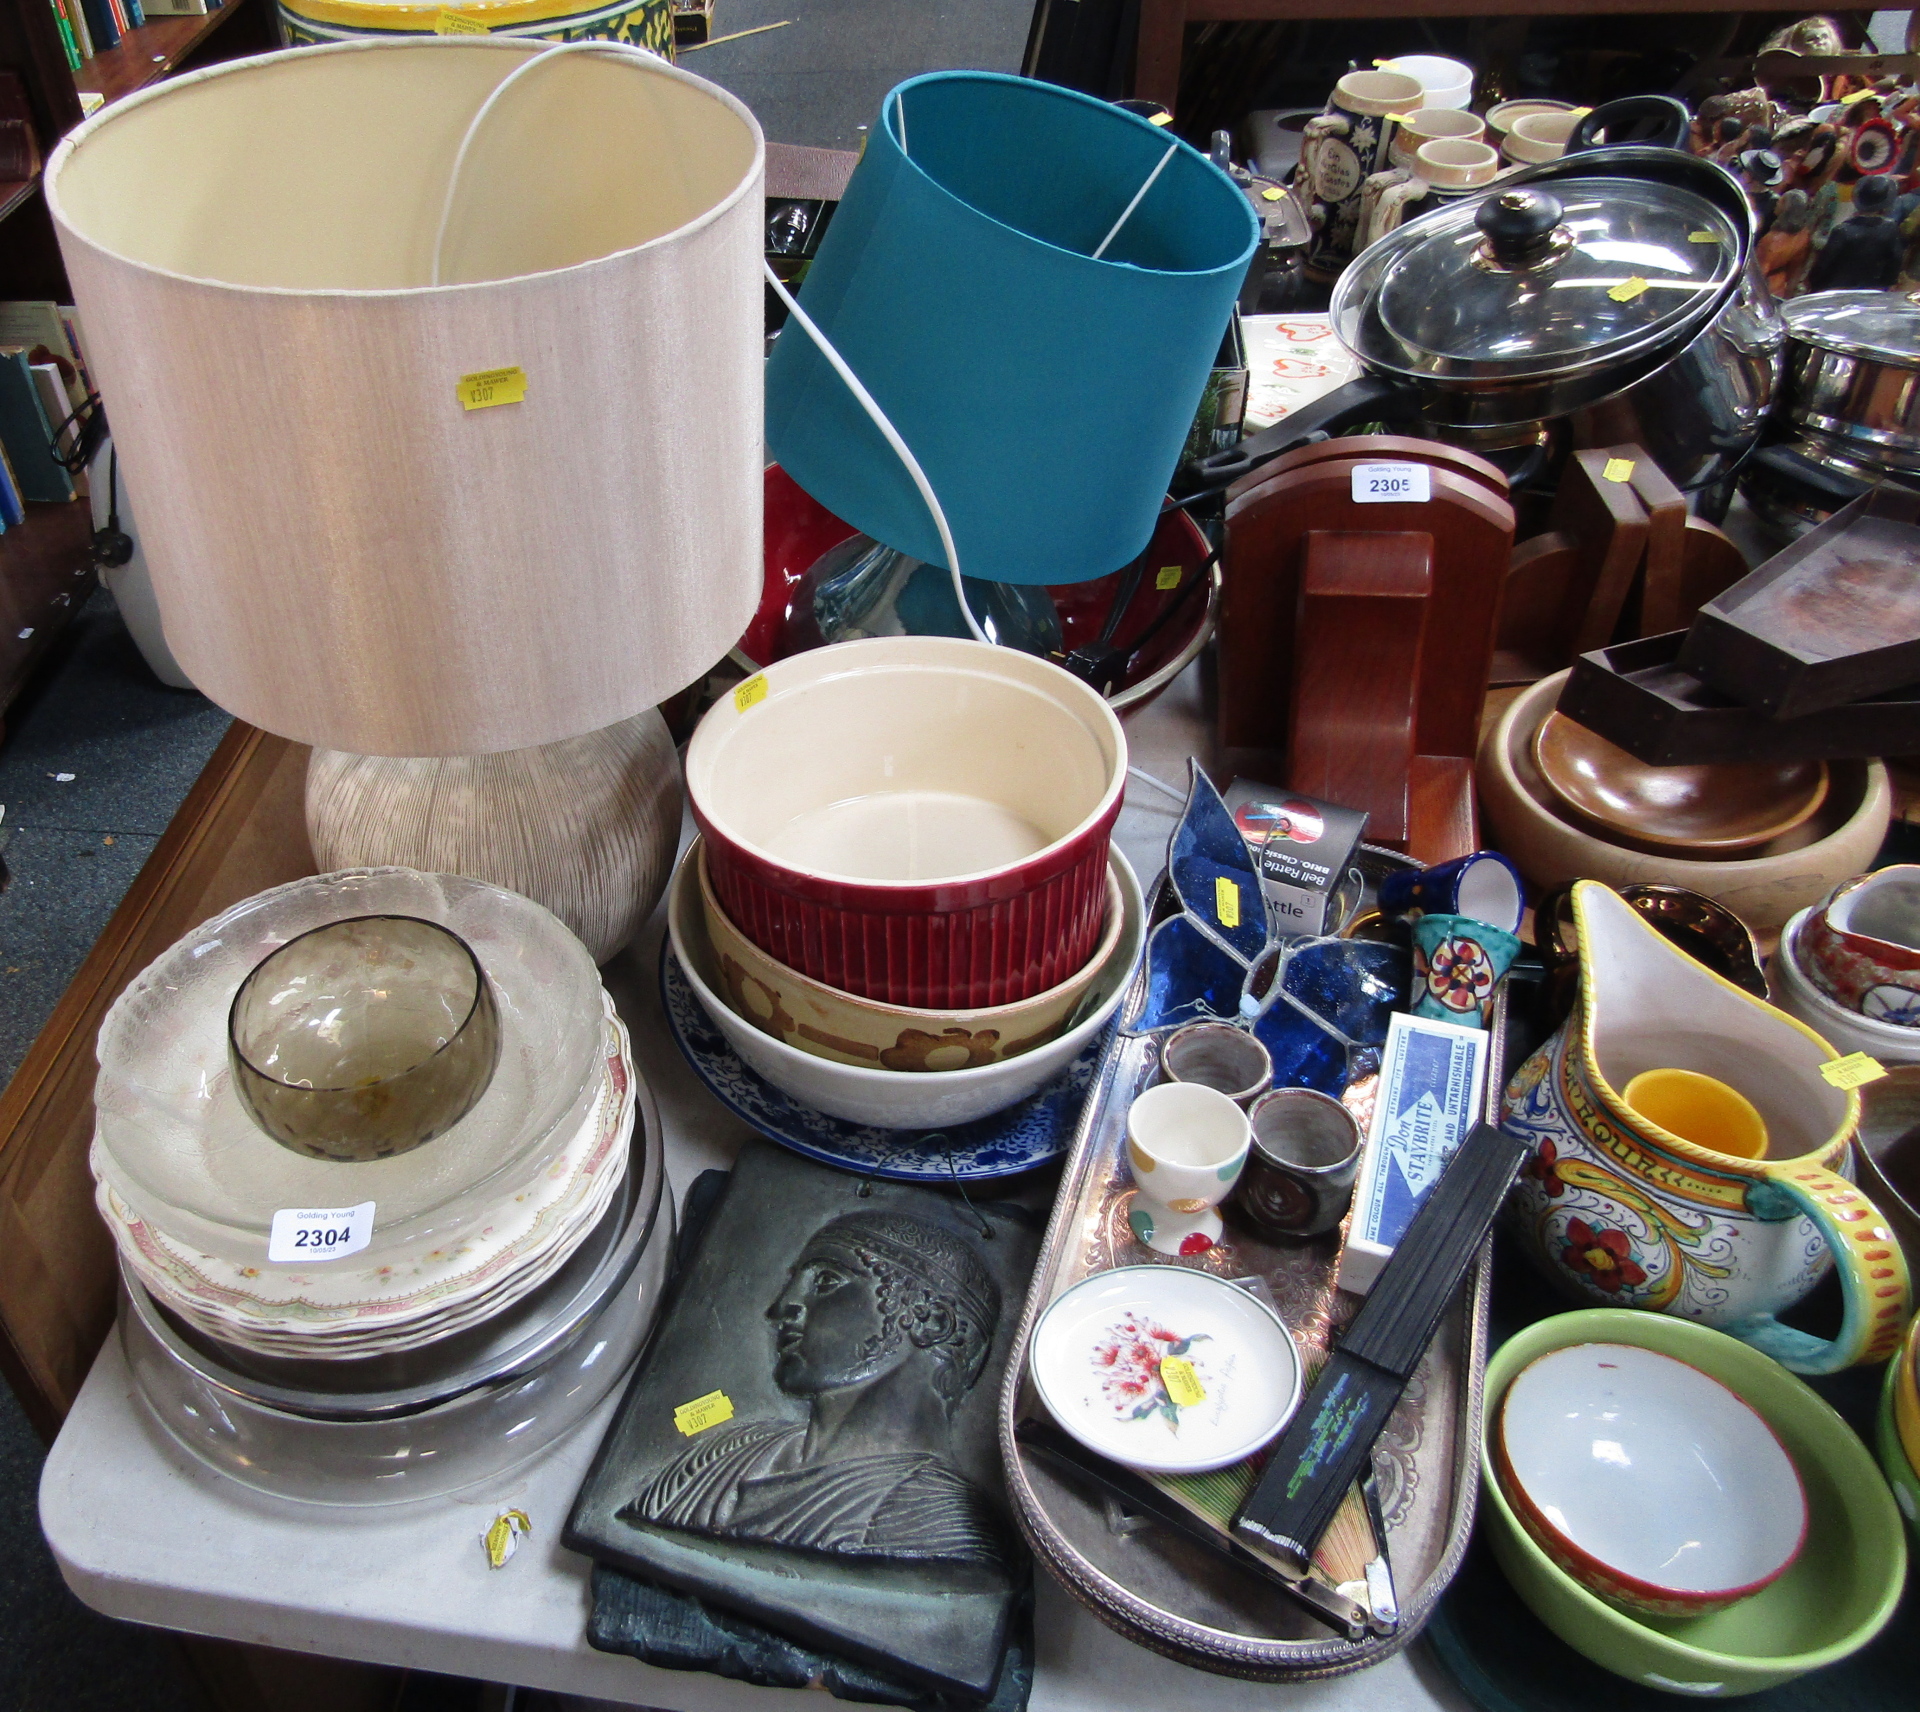 Household wares, comprising two table lamps, salad bowls, plates, umbrella stands, etc. (a quantity)